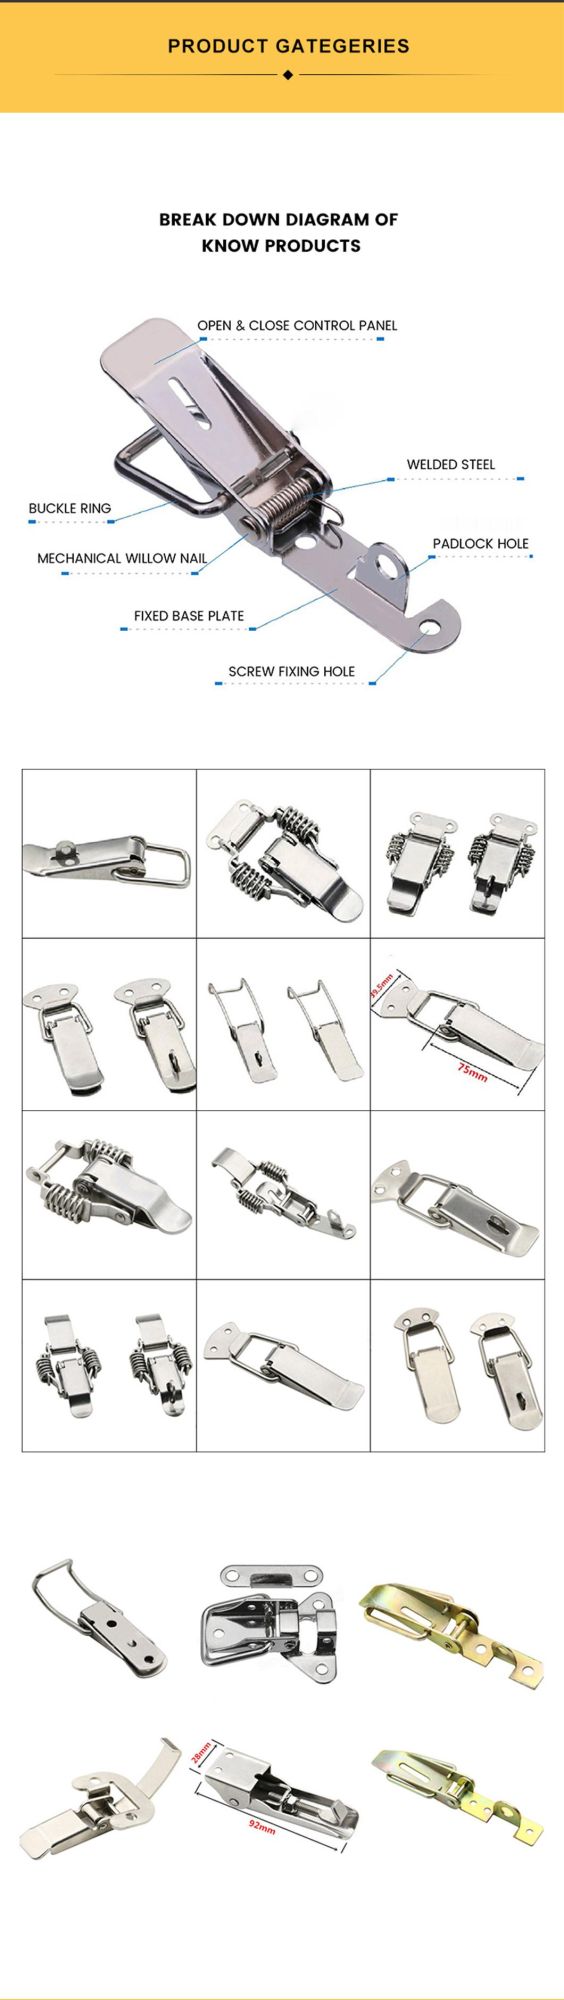 Spring Double Loaded Adjustable Clasp Bailing Latch Box Buckle Honey Centrifuge Parts Toggle Latches